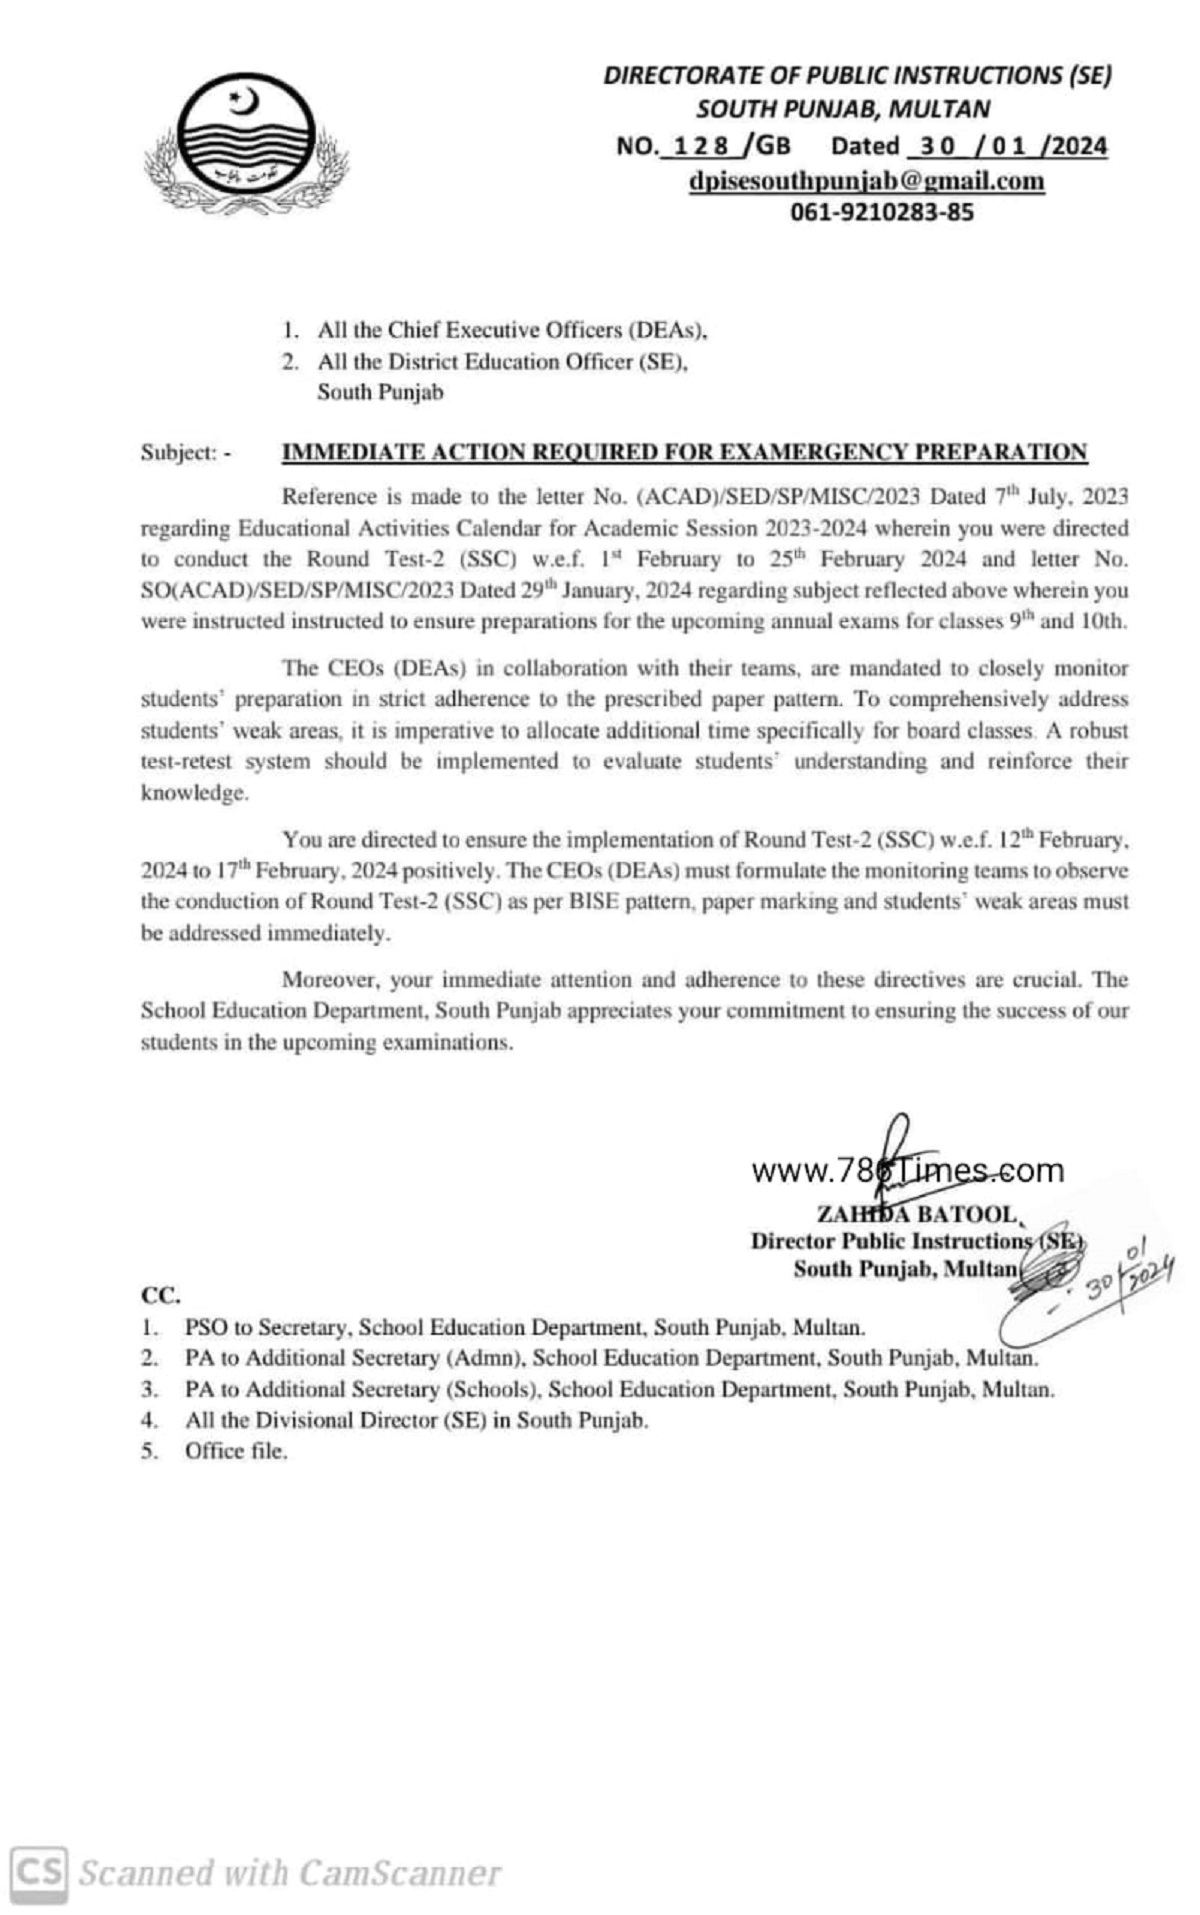 Immediate Action Required for Matric Examination Preparation